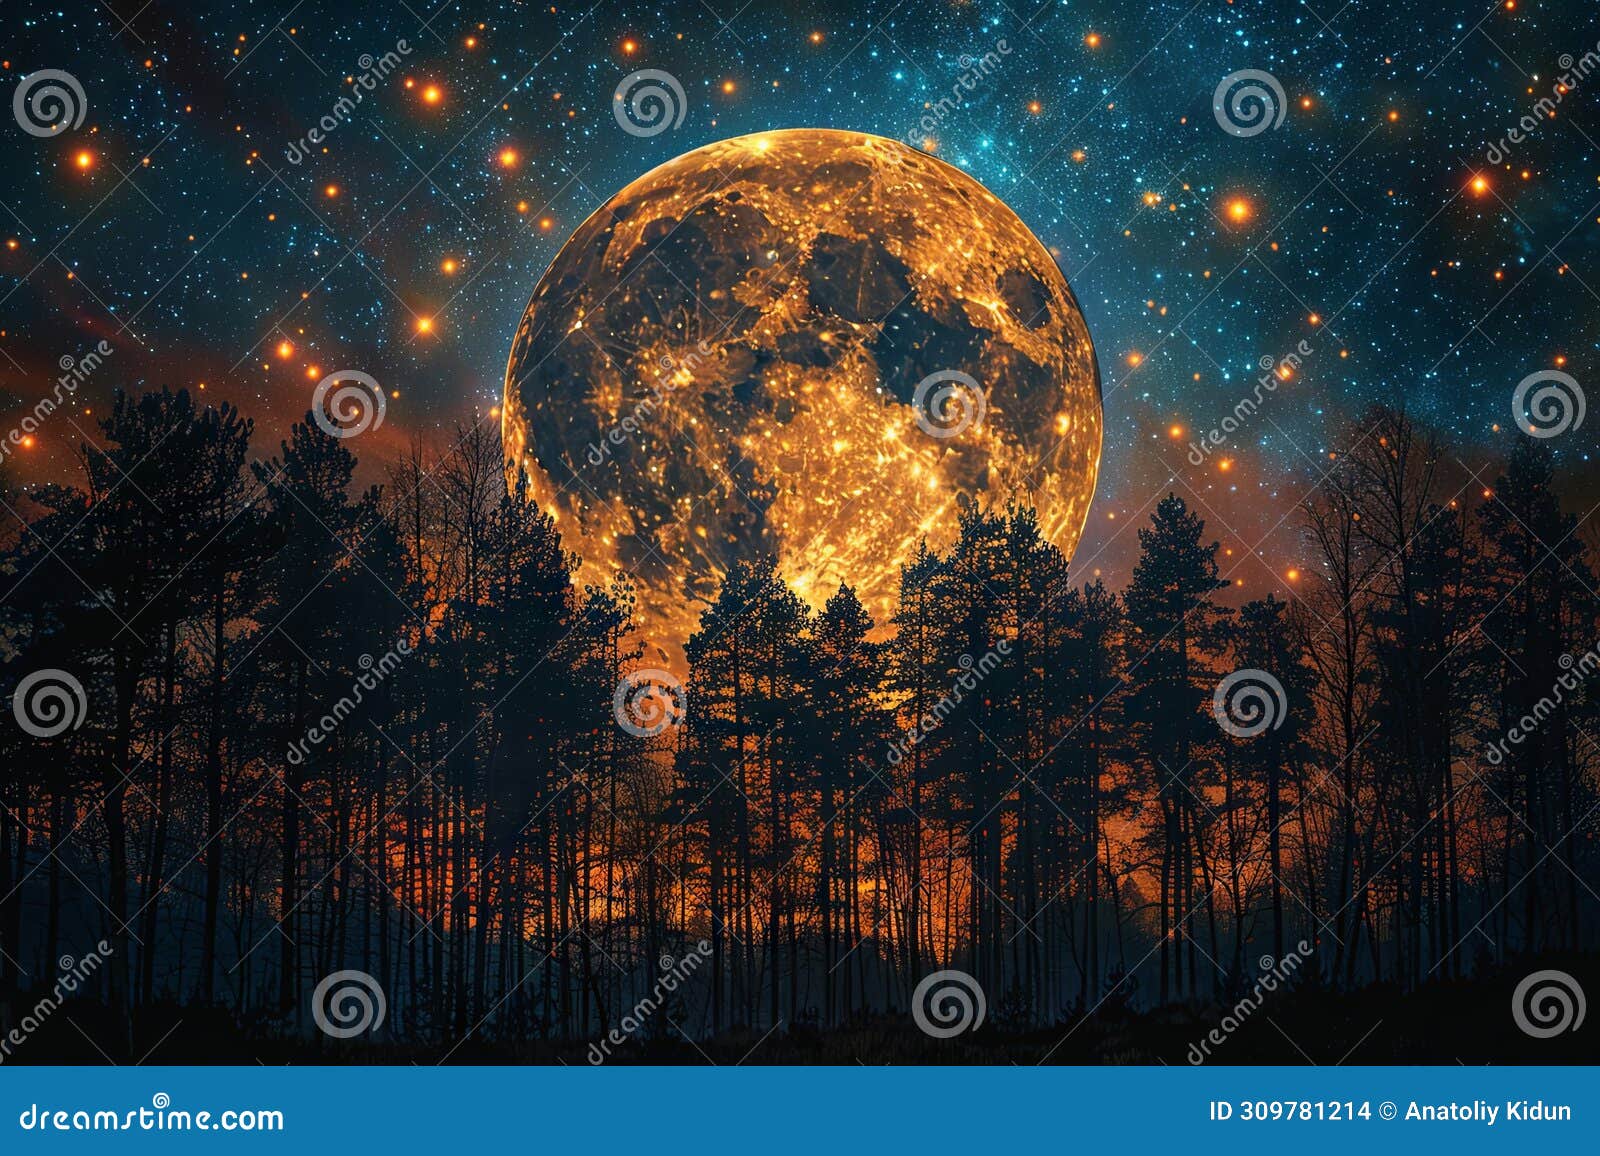 moonrise sky, stars, milky and trees, in the style of spectacular backdrops, realistic usage of light and color